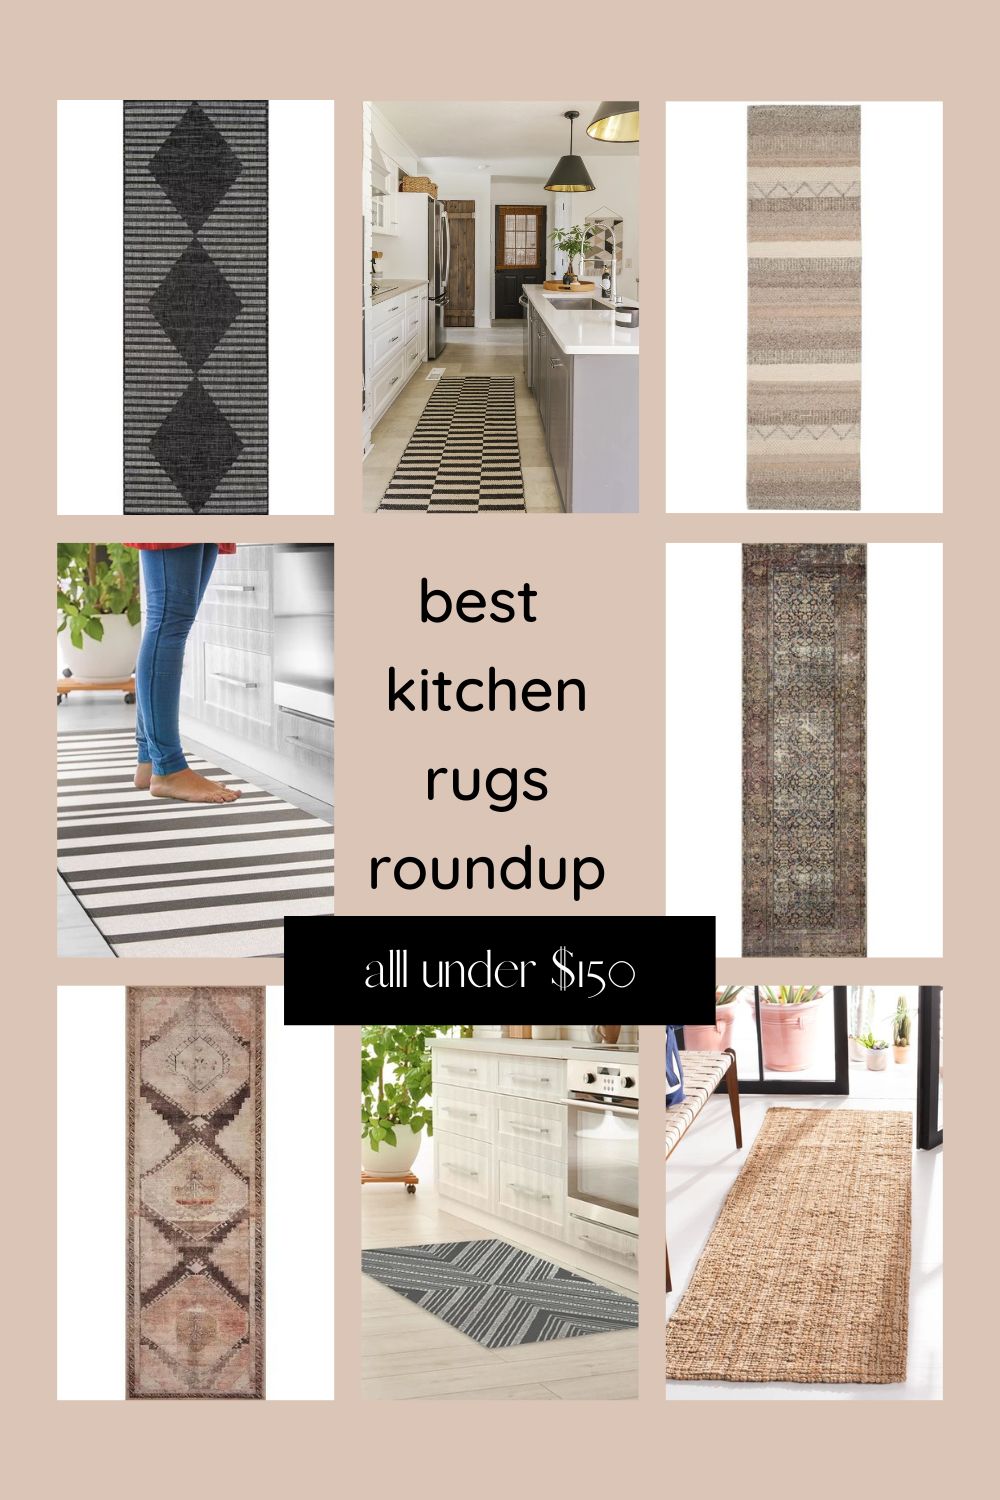 https://designingvibes.com/wp-content/uploads/2023/01/the-best-kitchen-rugs-and-mats-333.jpg